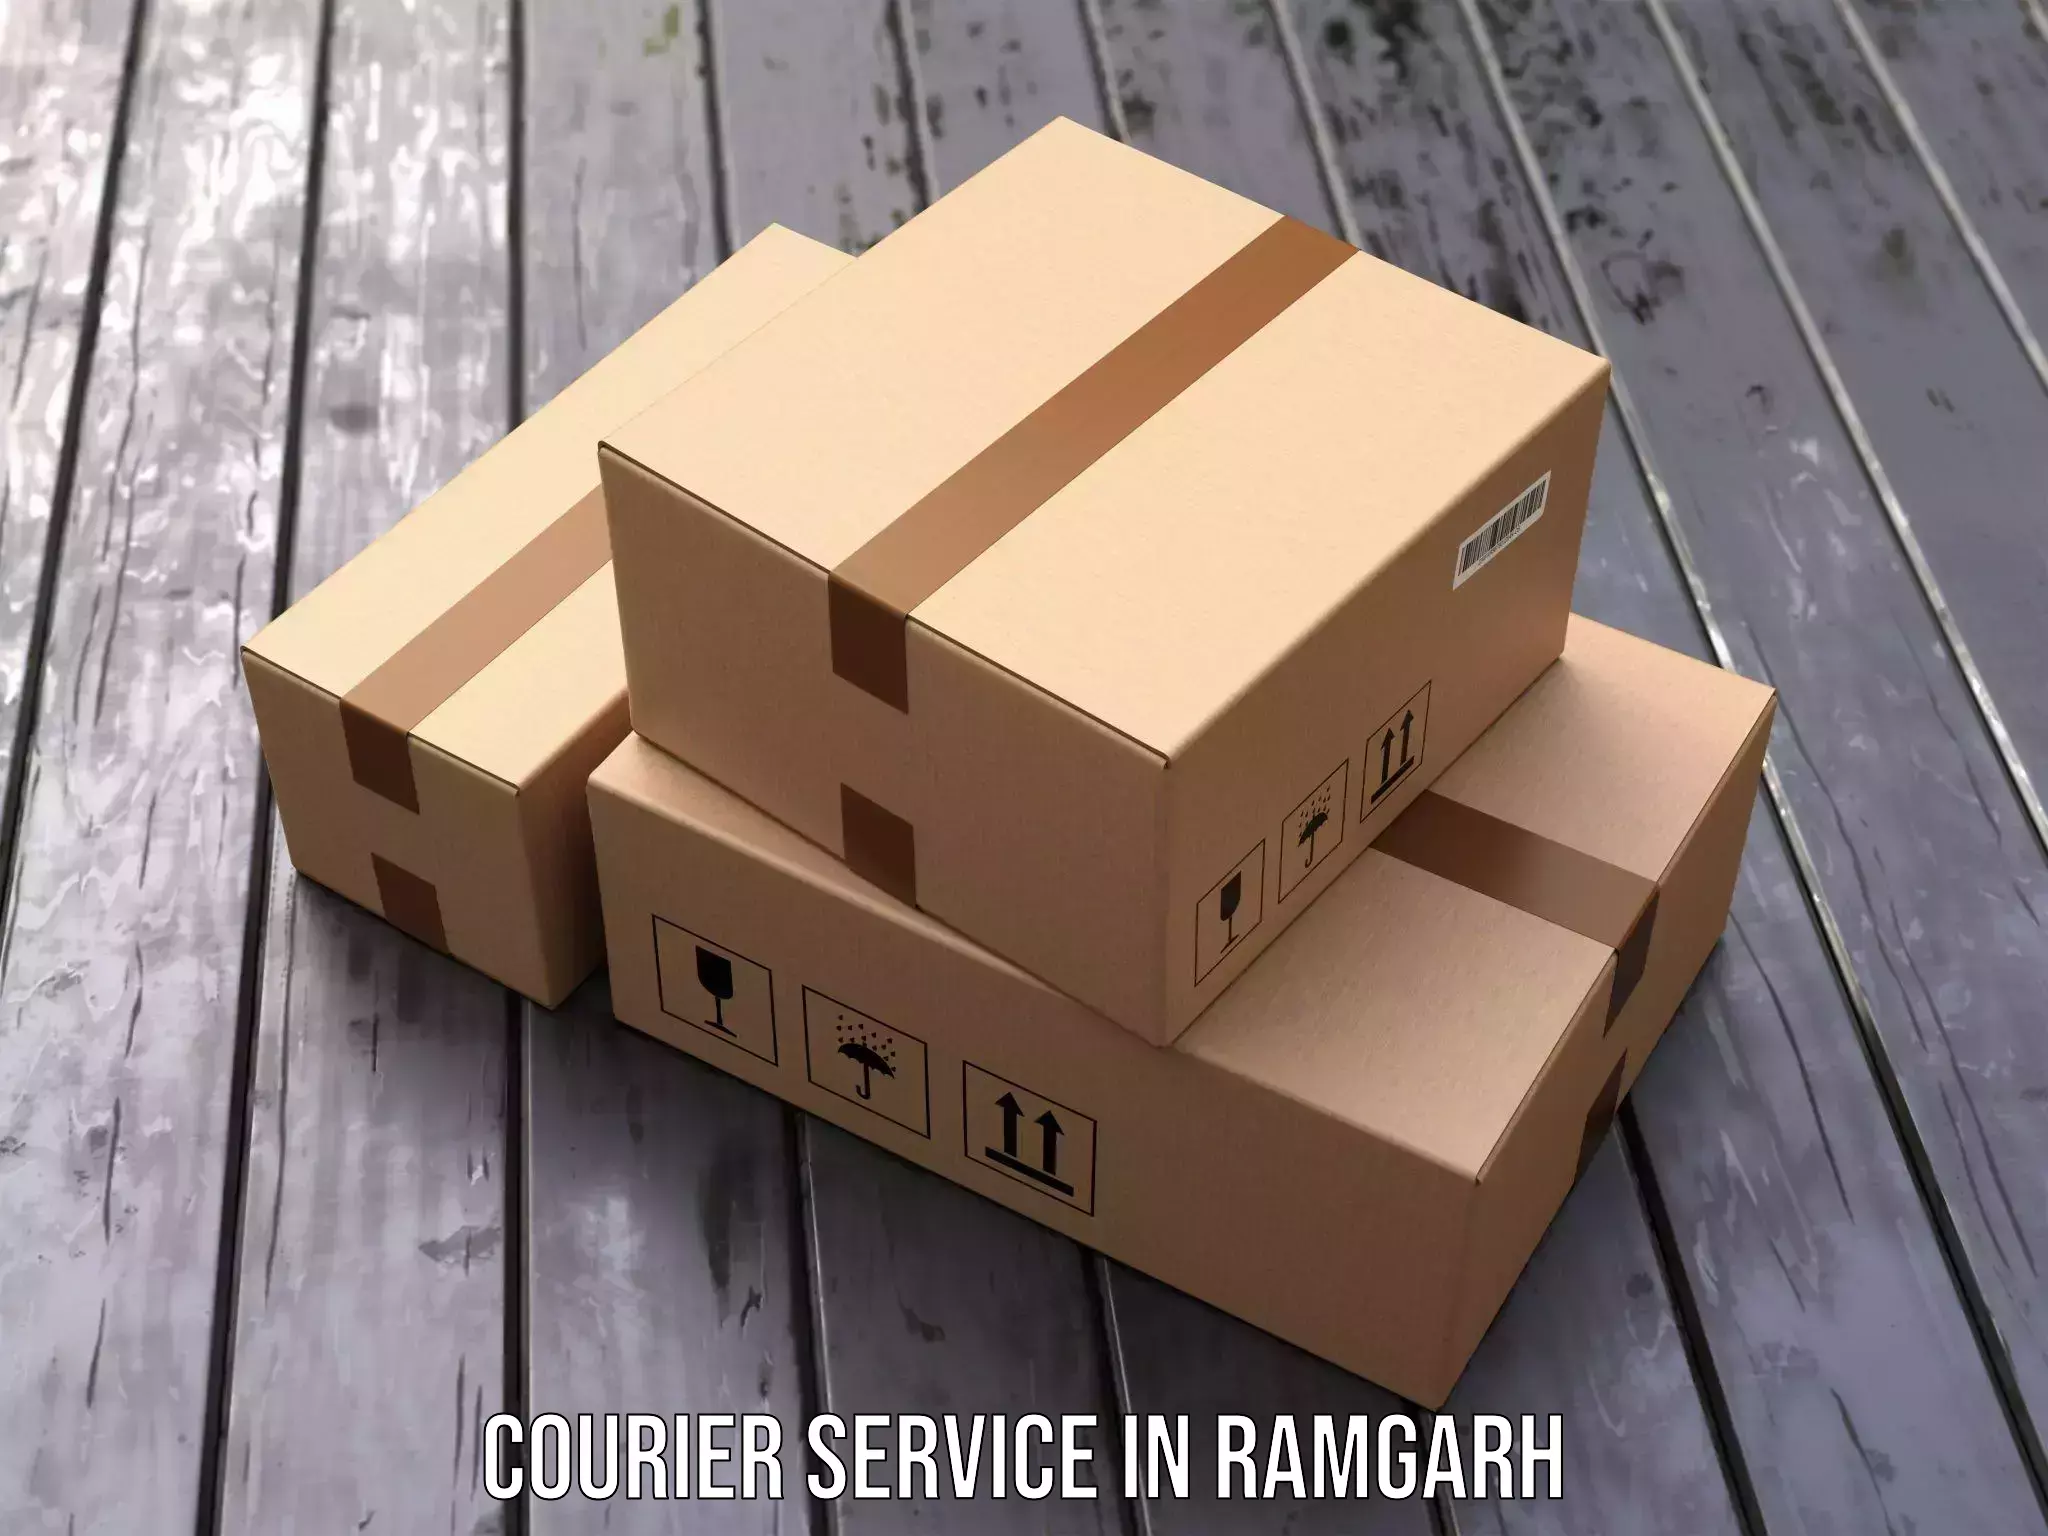 Affordable international shipping in Ramgarh